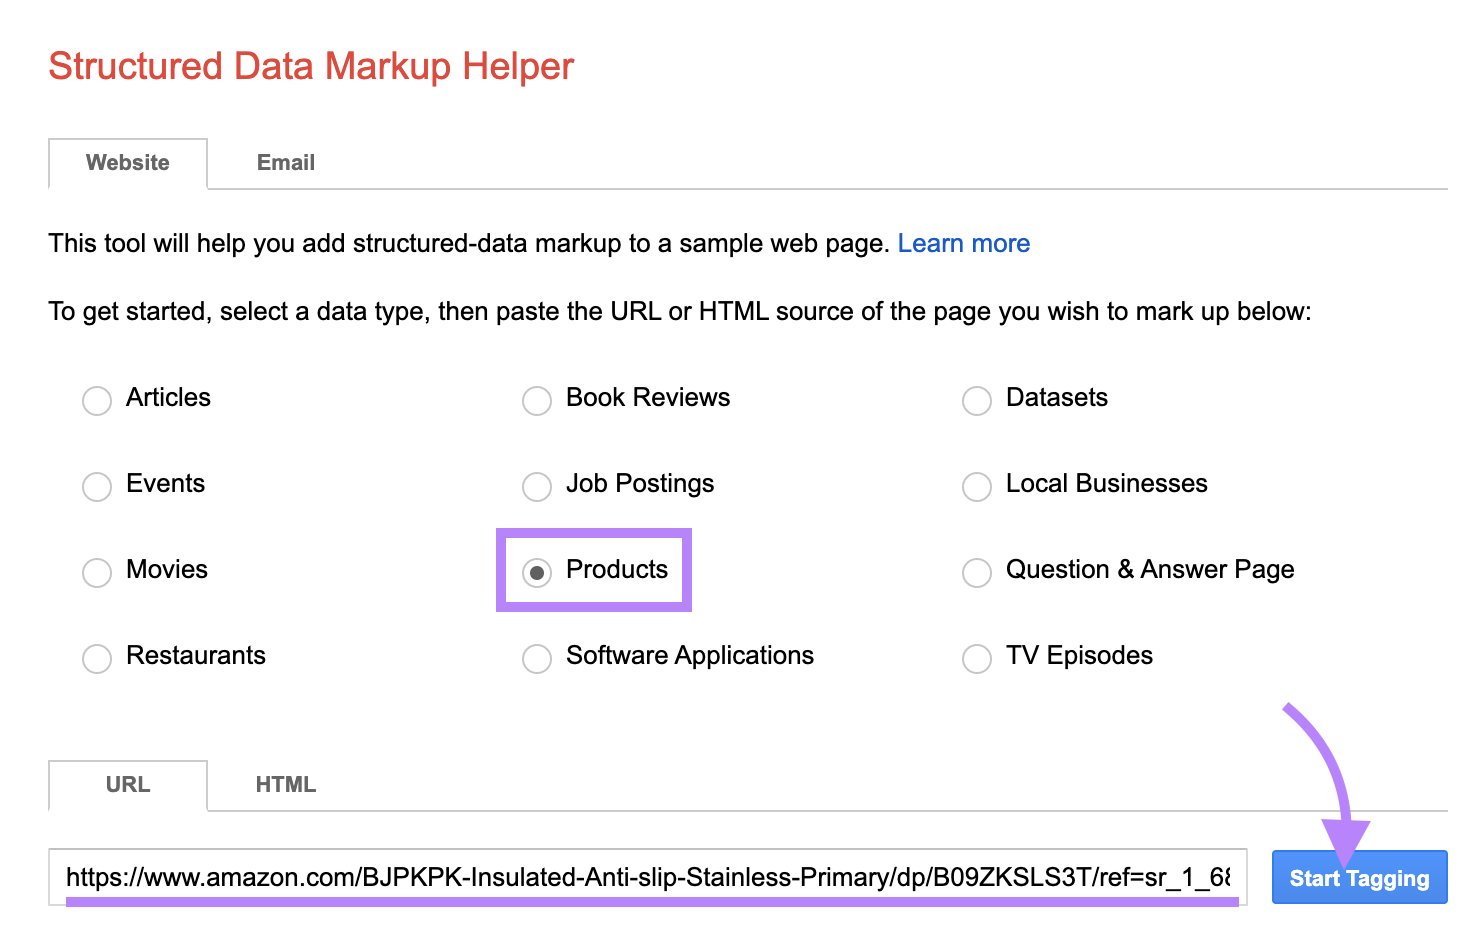 enter your product page URL to Google’s Structured Data Markup Helper